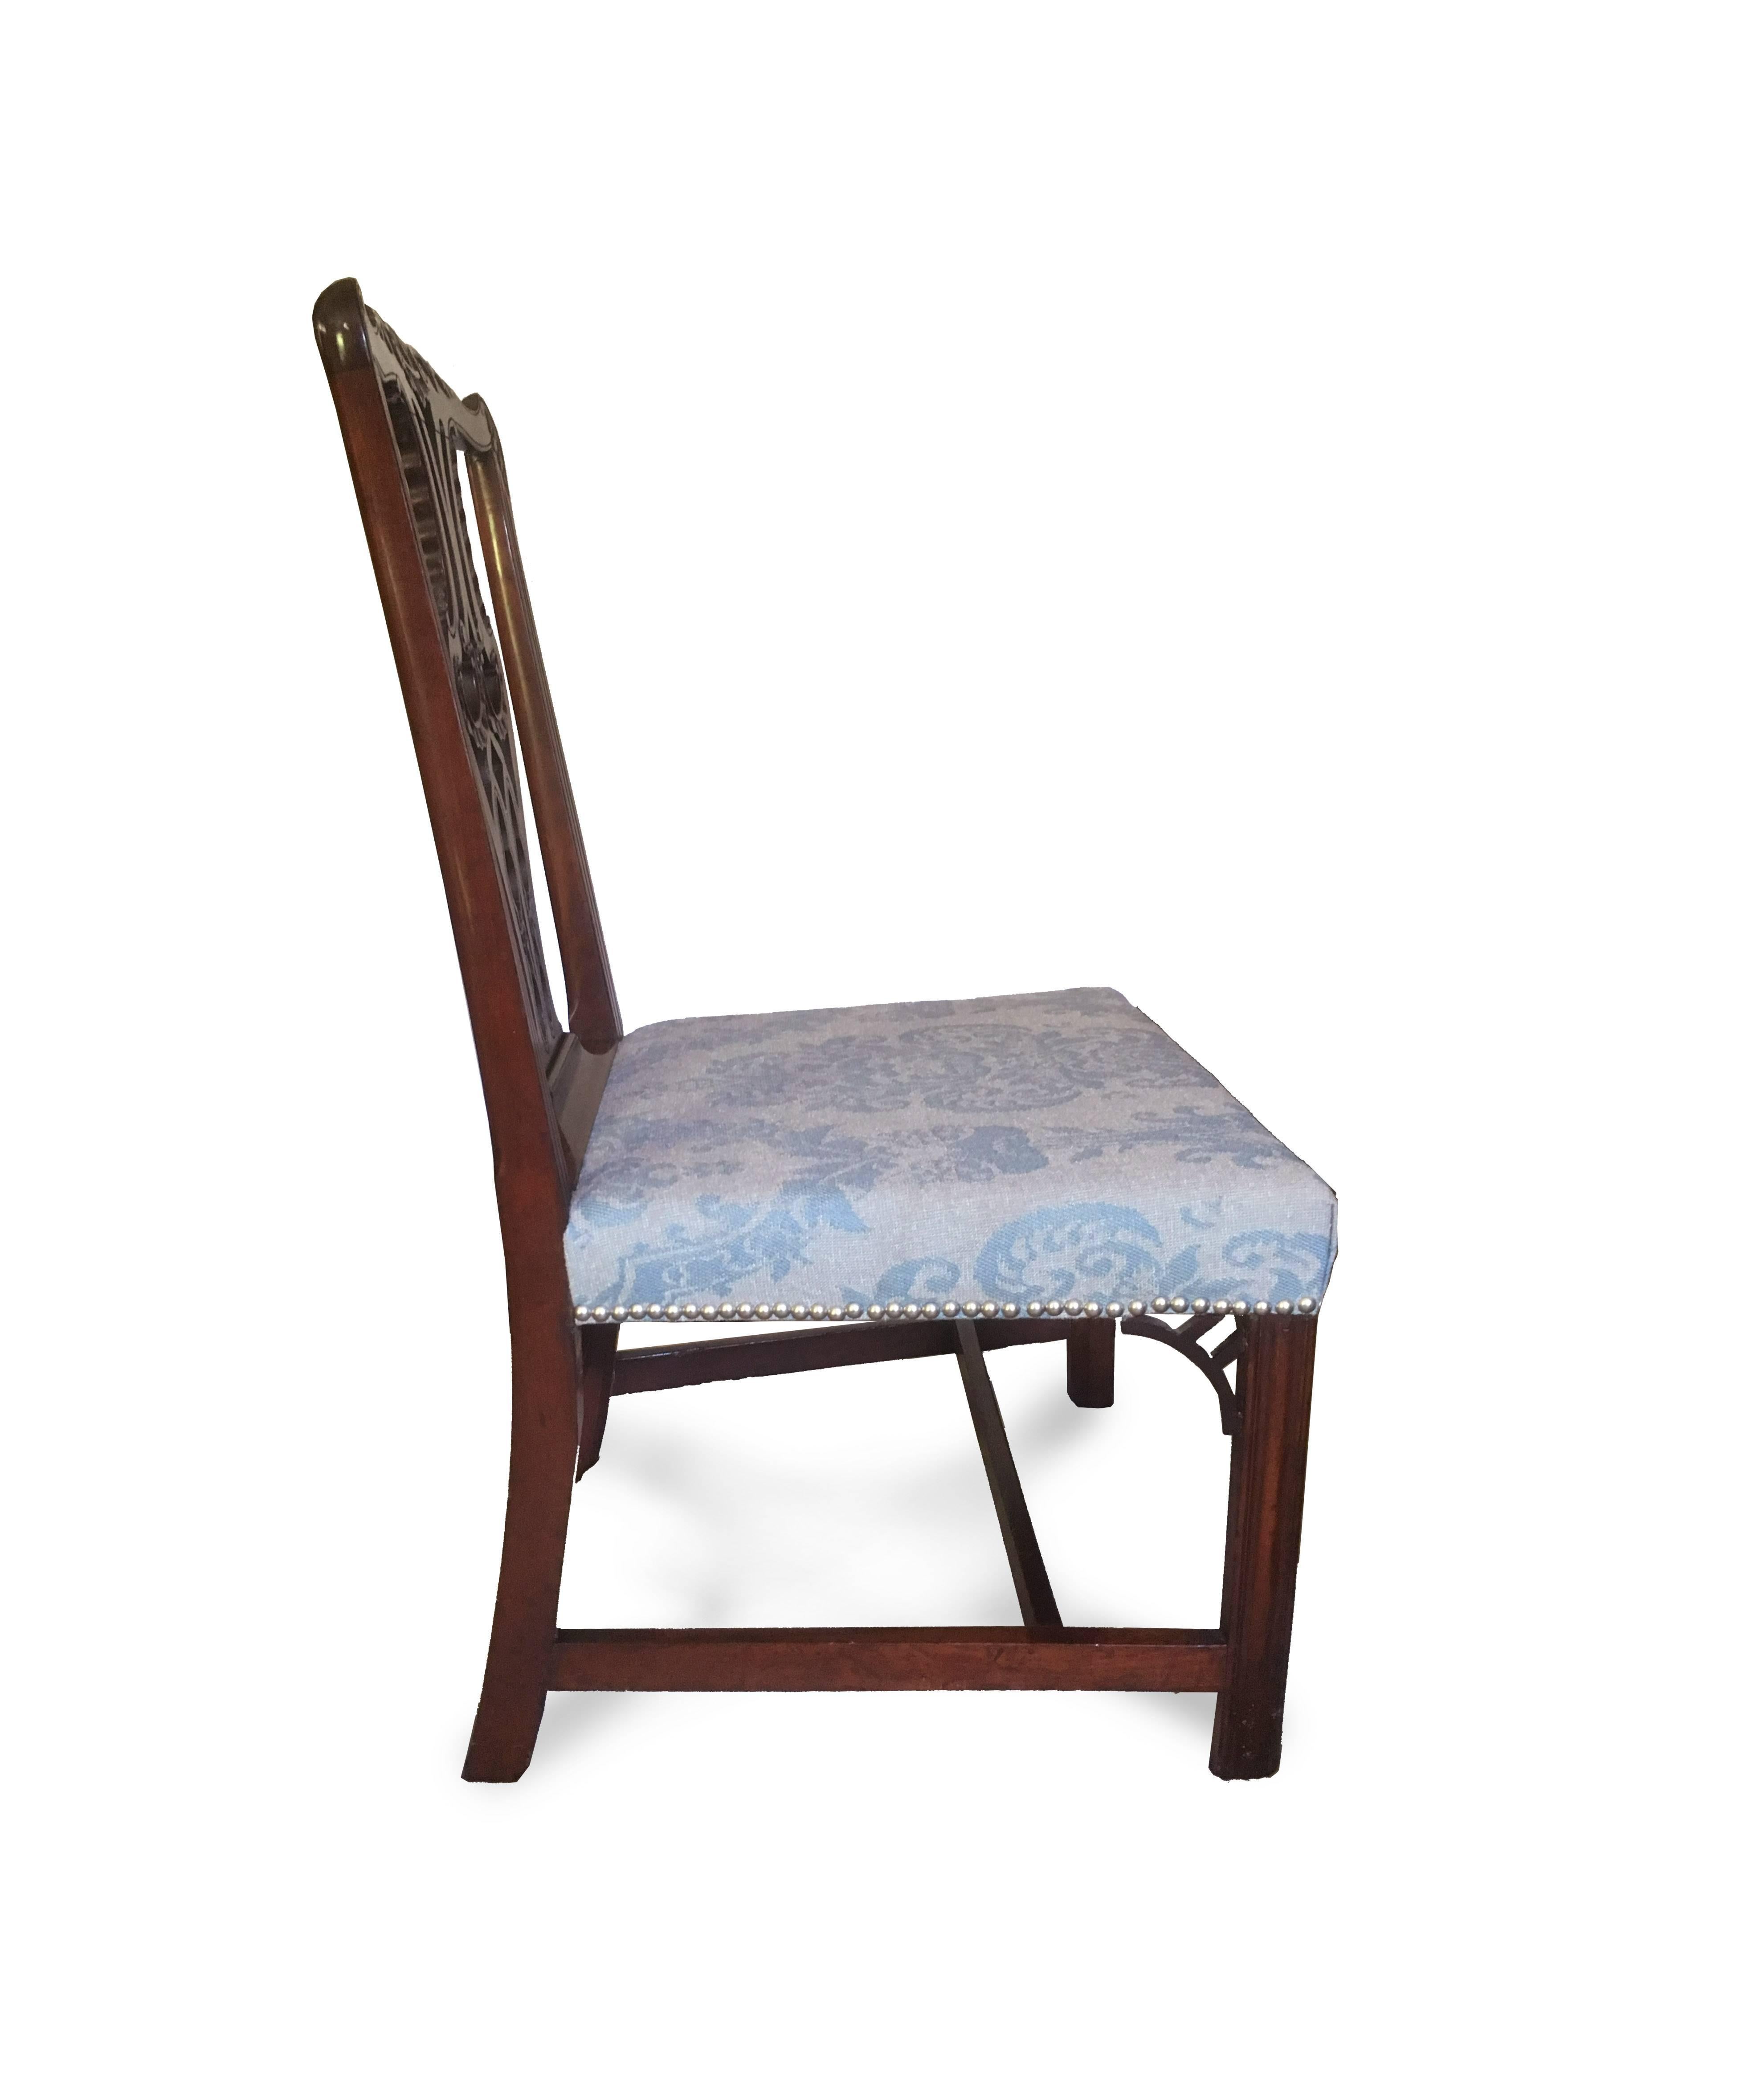 A very fine Chippendale side chair with excellent splat carving featuring fluting, acanthus, Baroque Cs, and Gothic lancet arches. The marlborough legs with molded profile support pierced Gothic brackets and over rail-stuffed seat. The cotton fabric